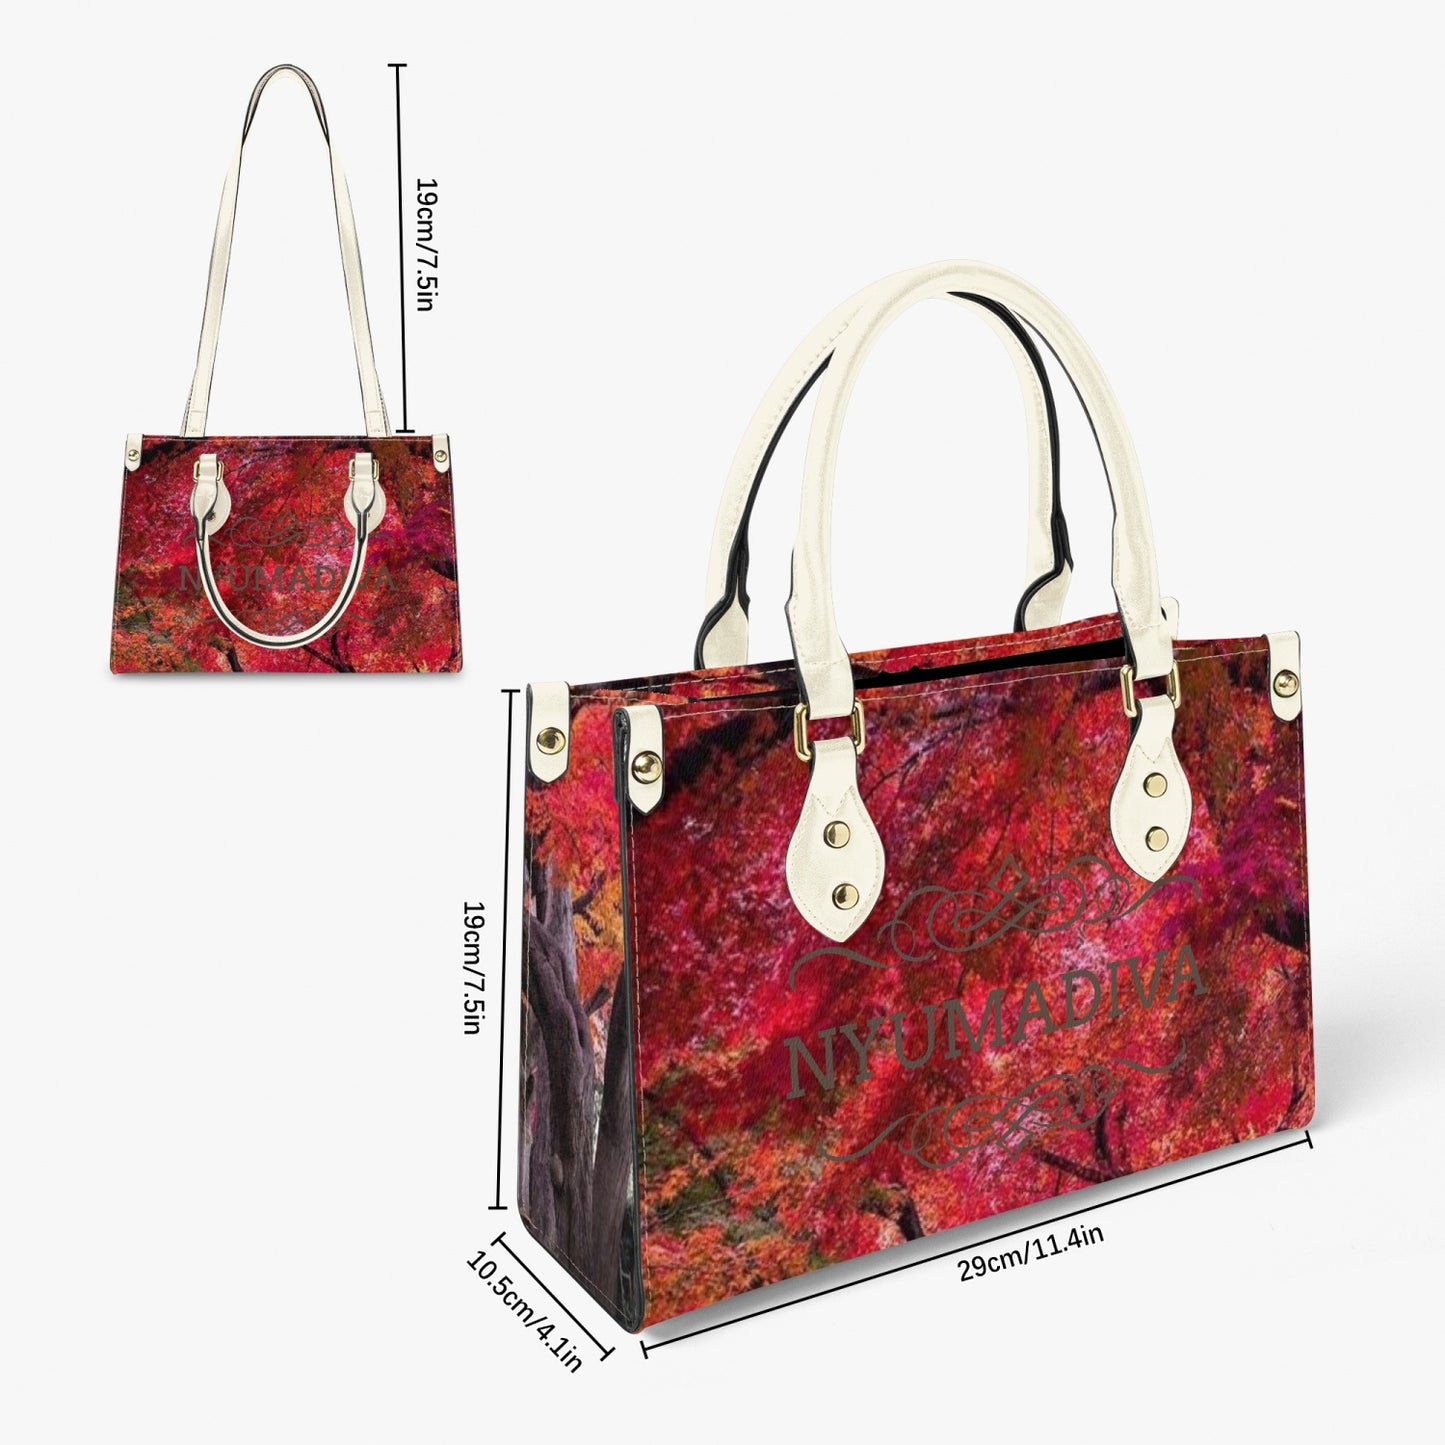 Autunno Women's Tote Bag - Long Strap